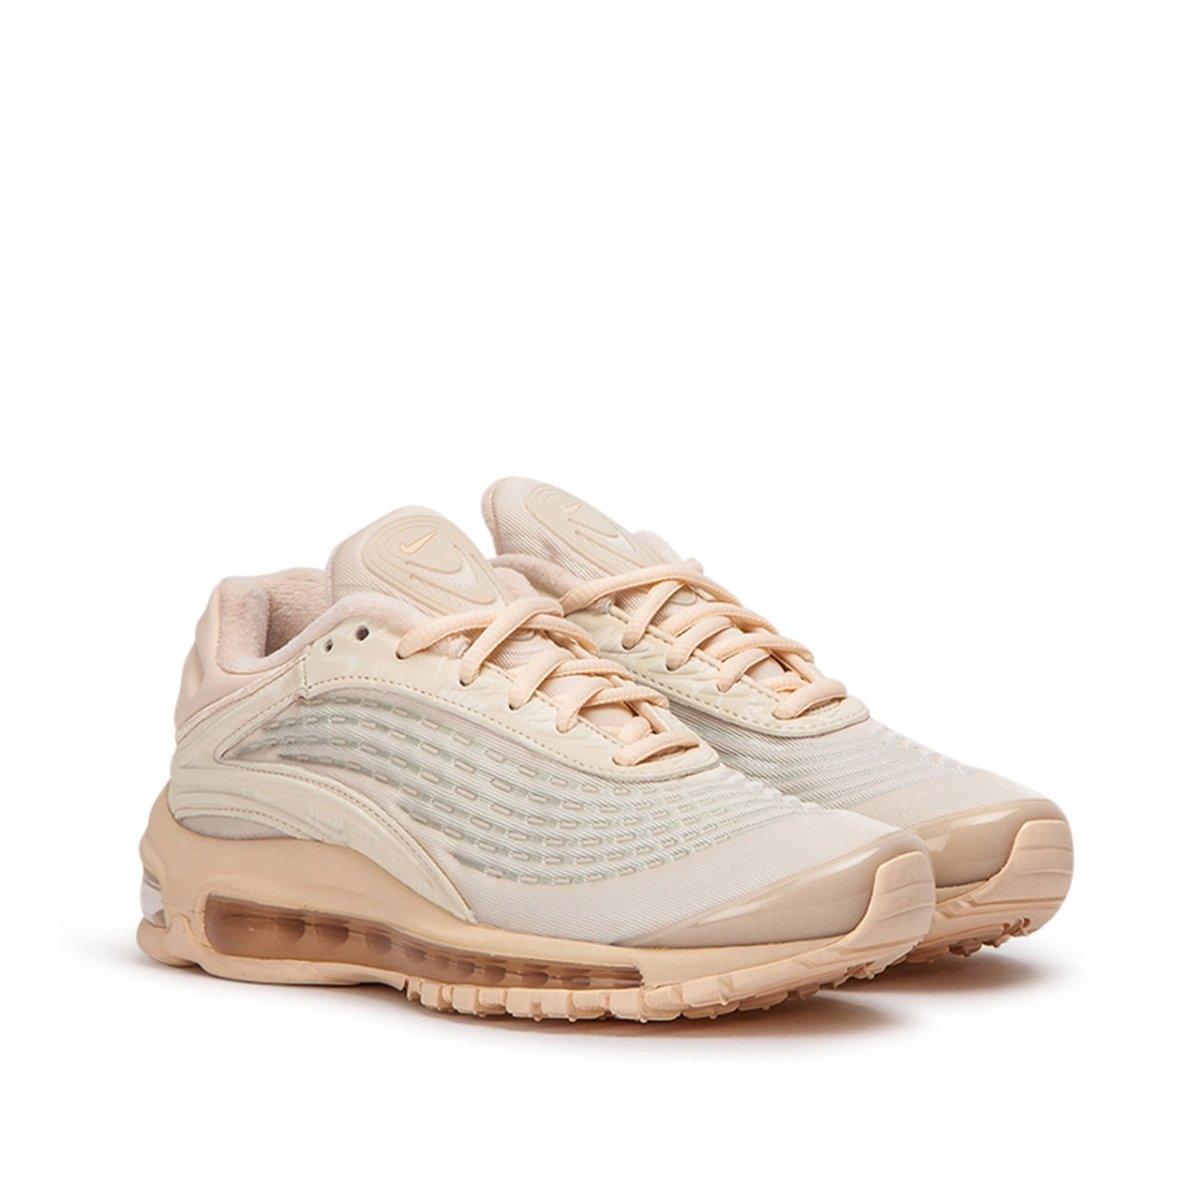 Nike WMNS Air Max Deluxe SE (Rosa)  - Allike Store